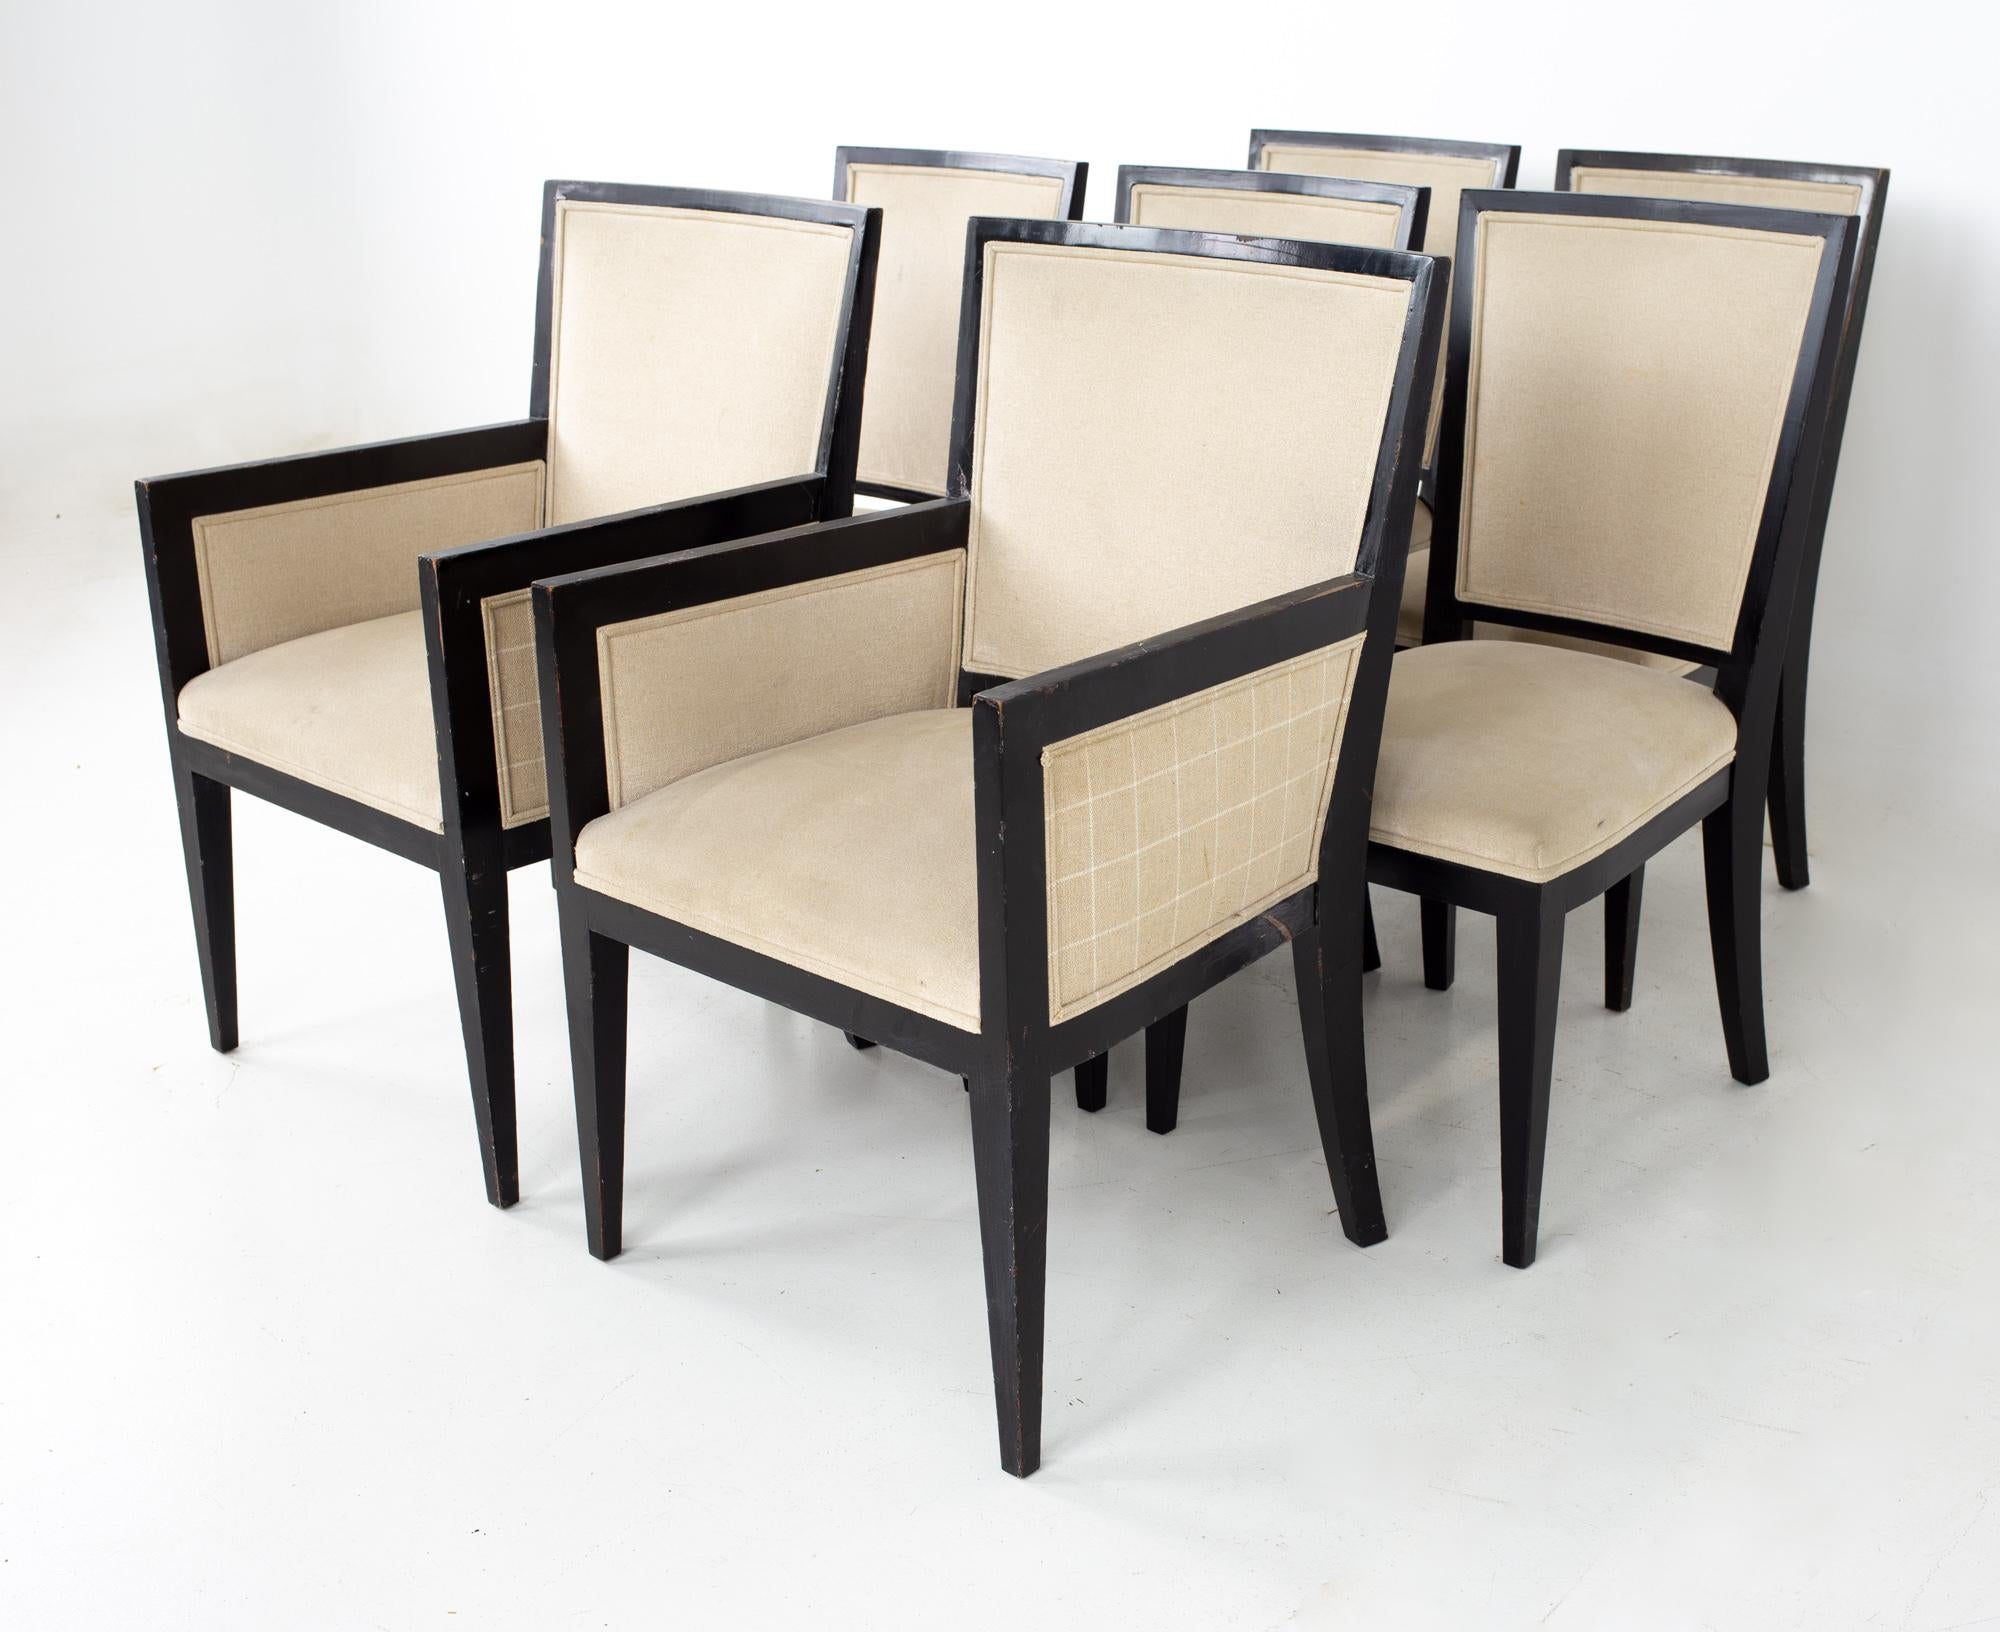 Jean Michel Frank style Mattaliano mid century ebonized mahogany dining chairs - set of 7.
Each chair measures: 22 wide x 20.5 deep x 36 high, with a seat height of 19 inches and arm height of 25.5 inches 

All pieces of furniture can be had in